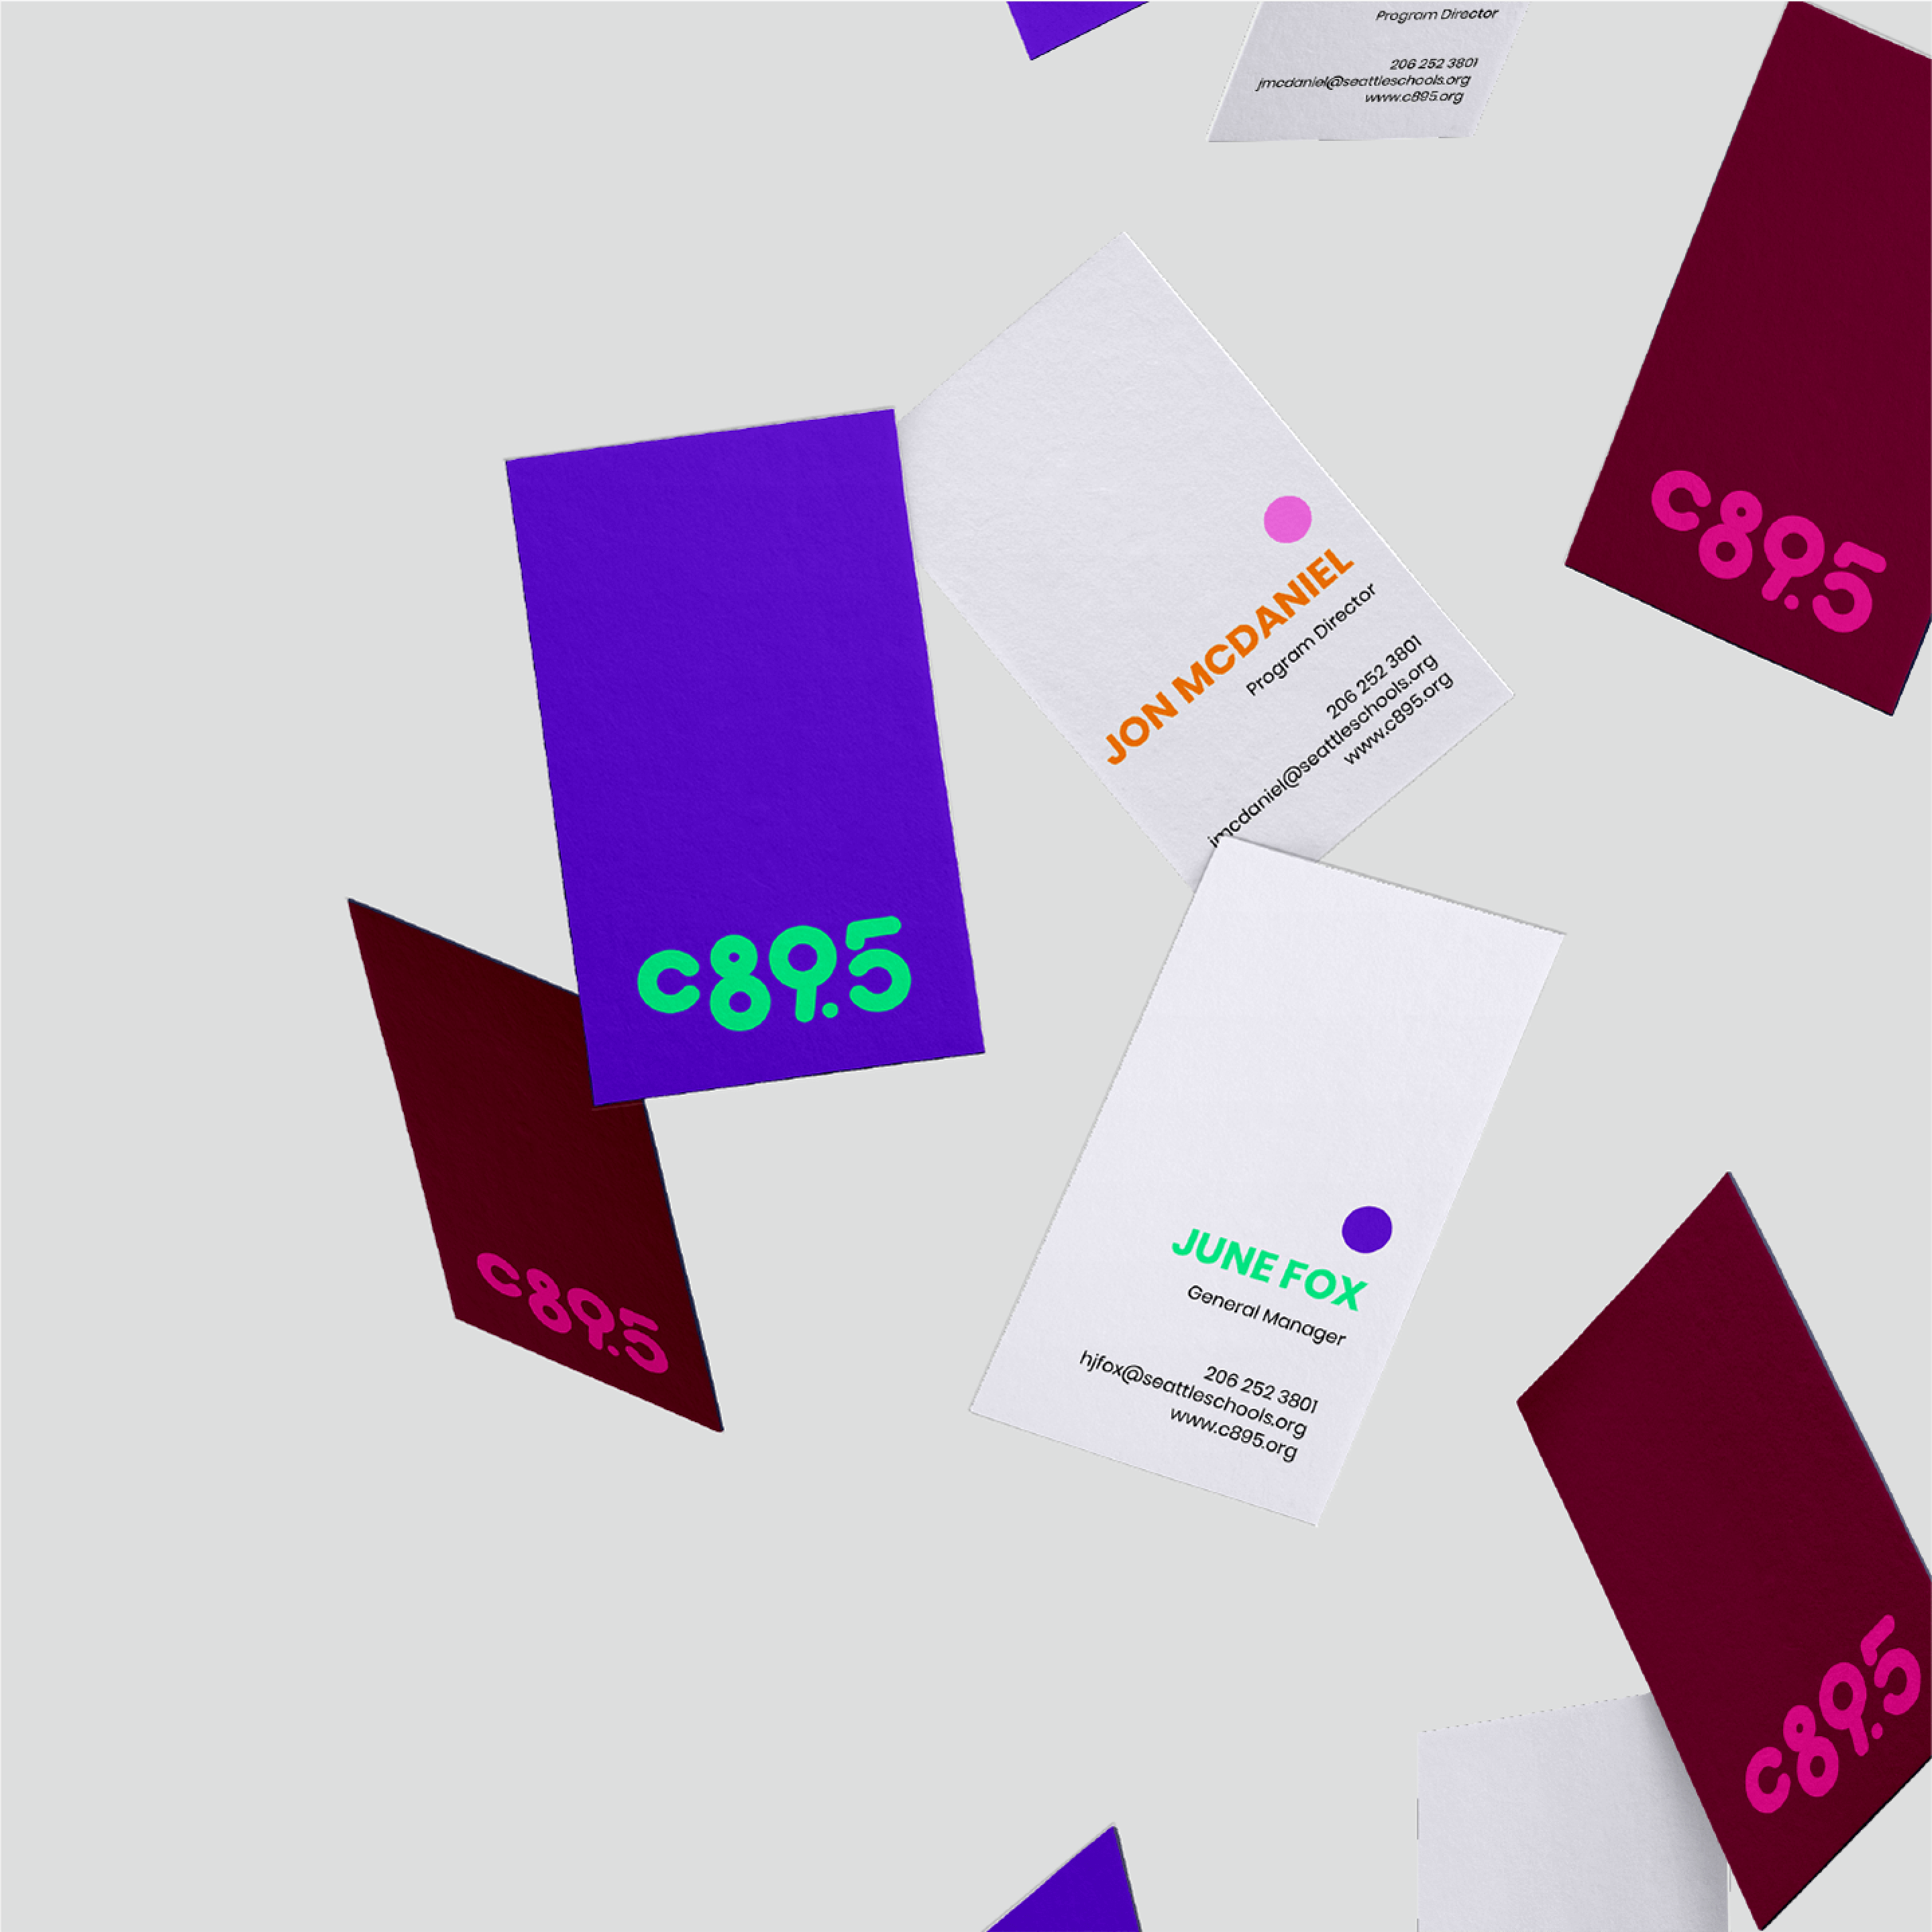 c89.5 brand expressed on business cards